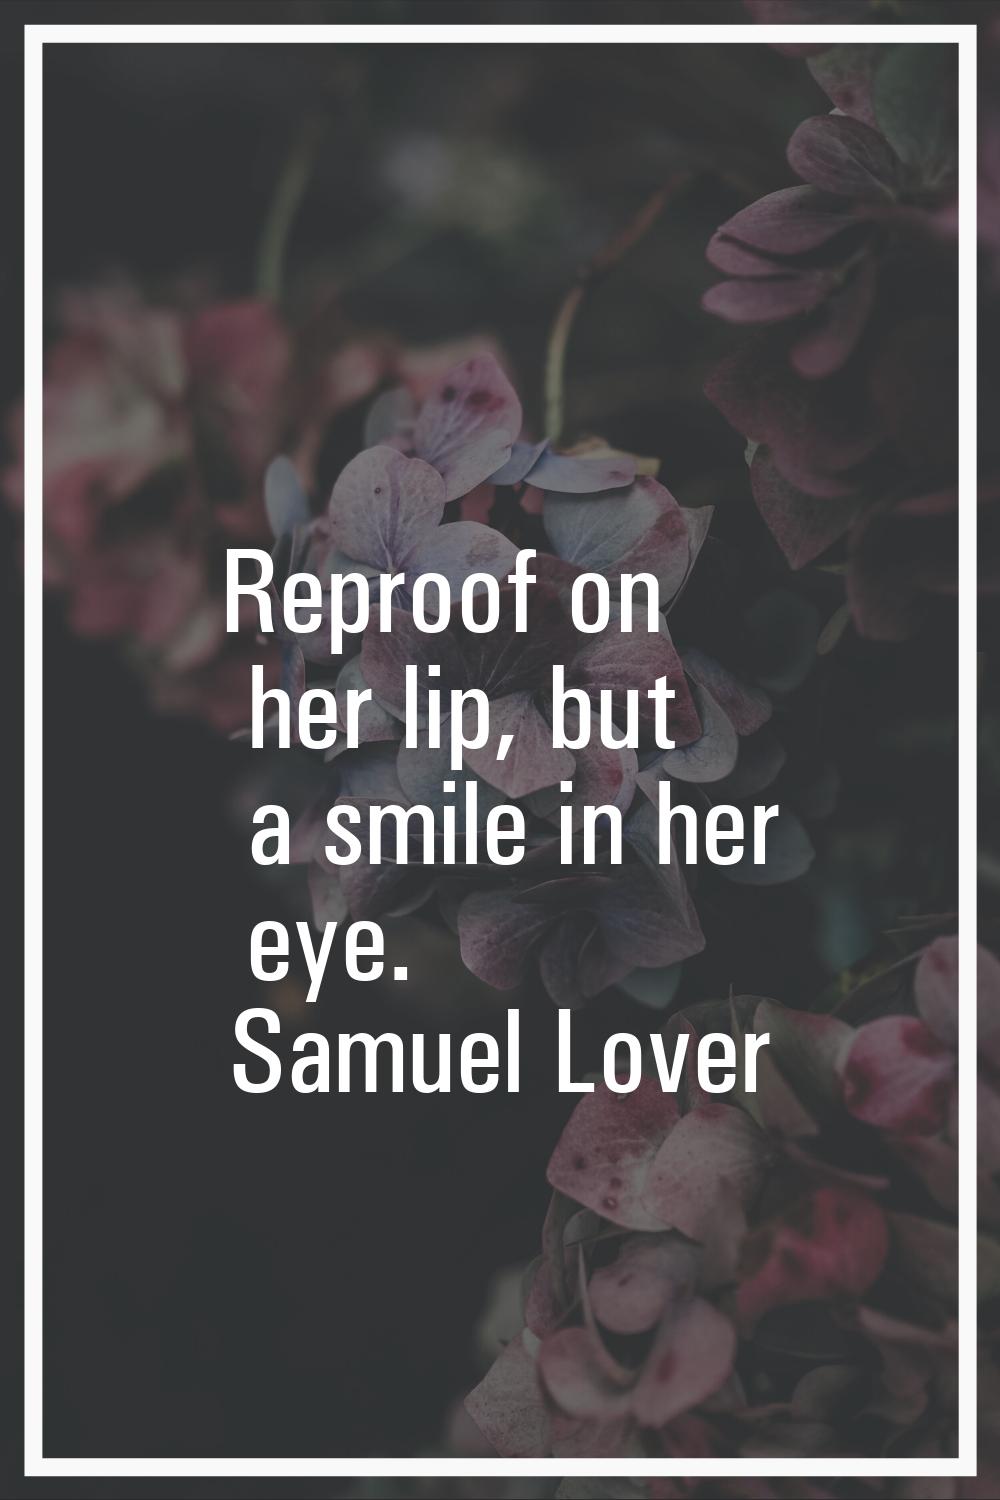 Reproof on her lip, but a smile in her eye.